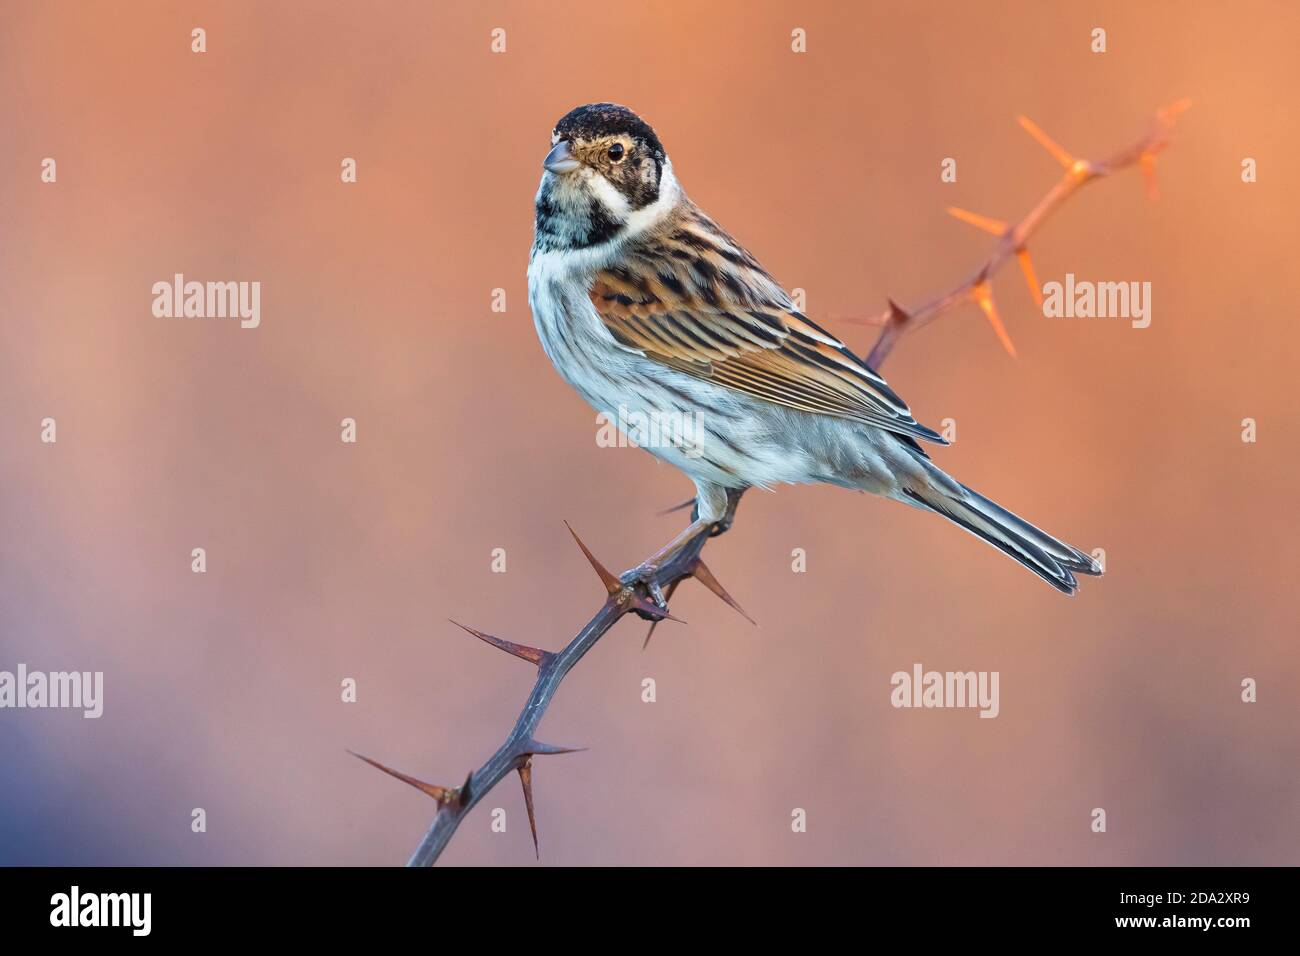 reed bunting (Emberiza schoeniclus), male perching on a prickly twig, side view, Italy, Piana fiorentina Stock Photo